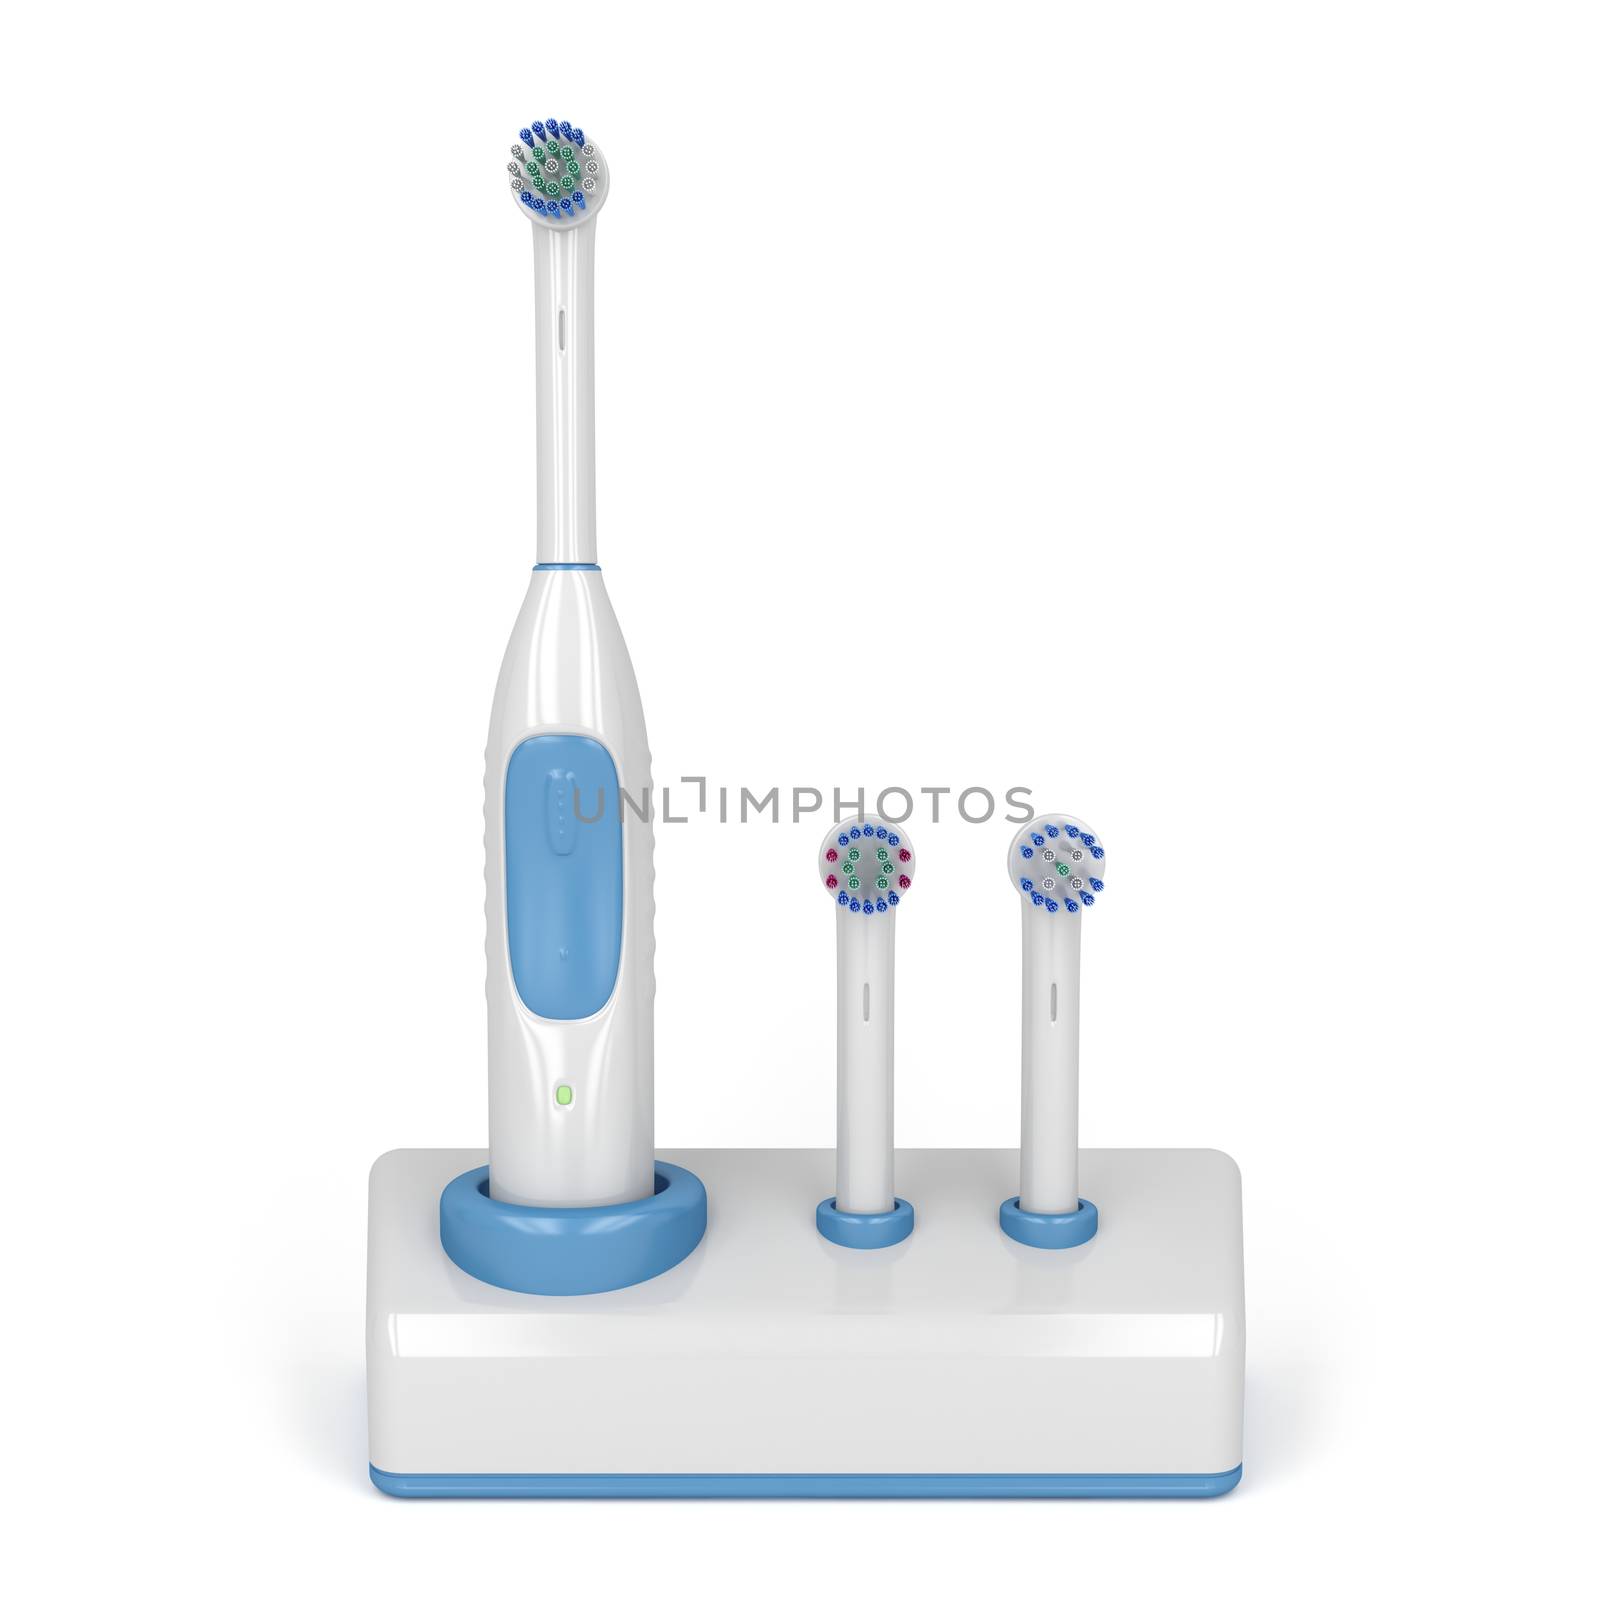 Electric toothbrush on stand with two spare brushes